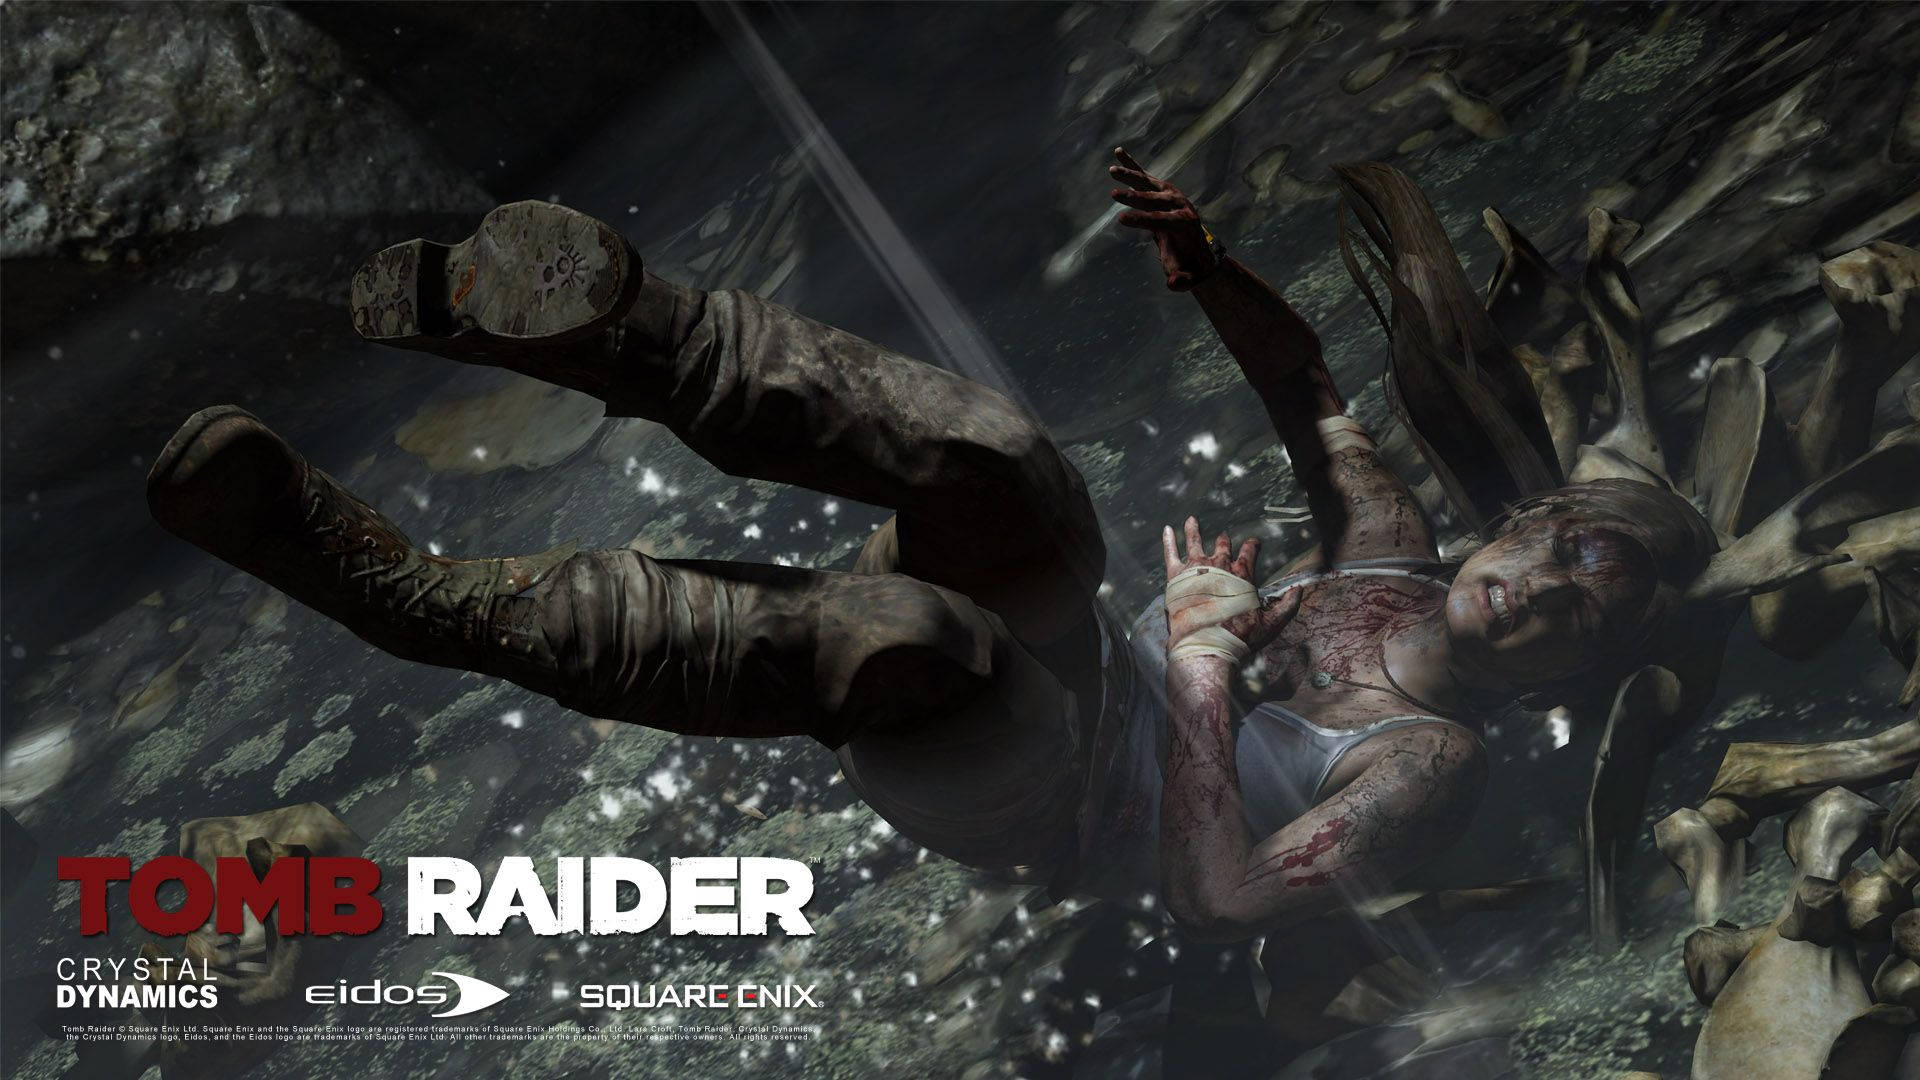 Lara Croft as She Explores the Uncharted Territories of Tomb Raider 9 Wallpaper